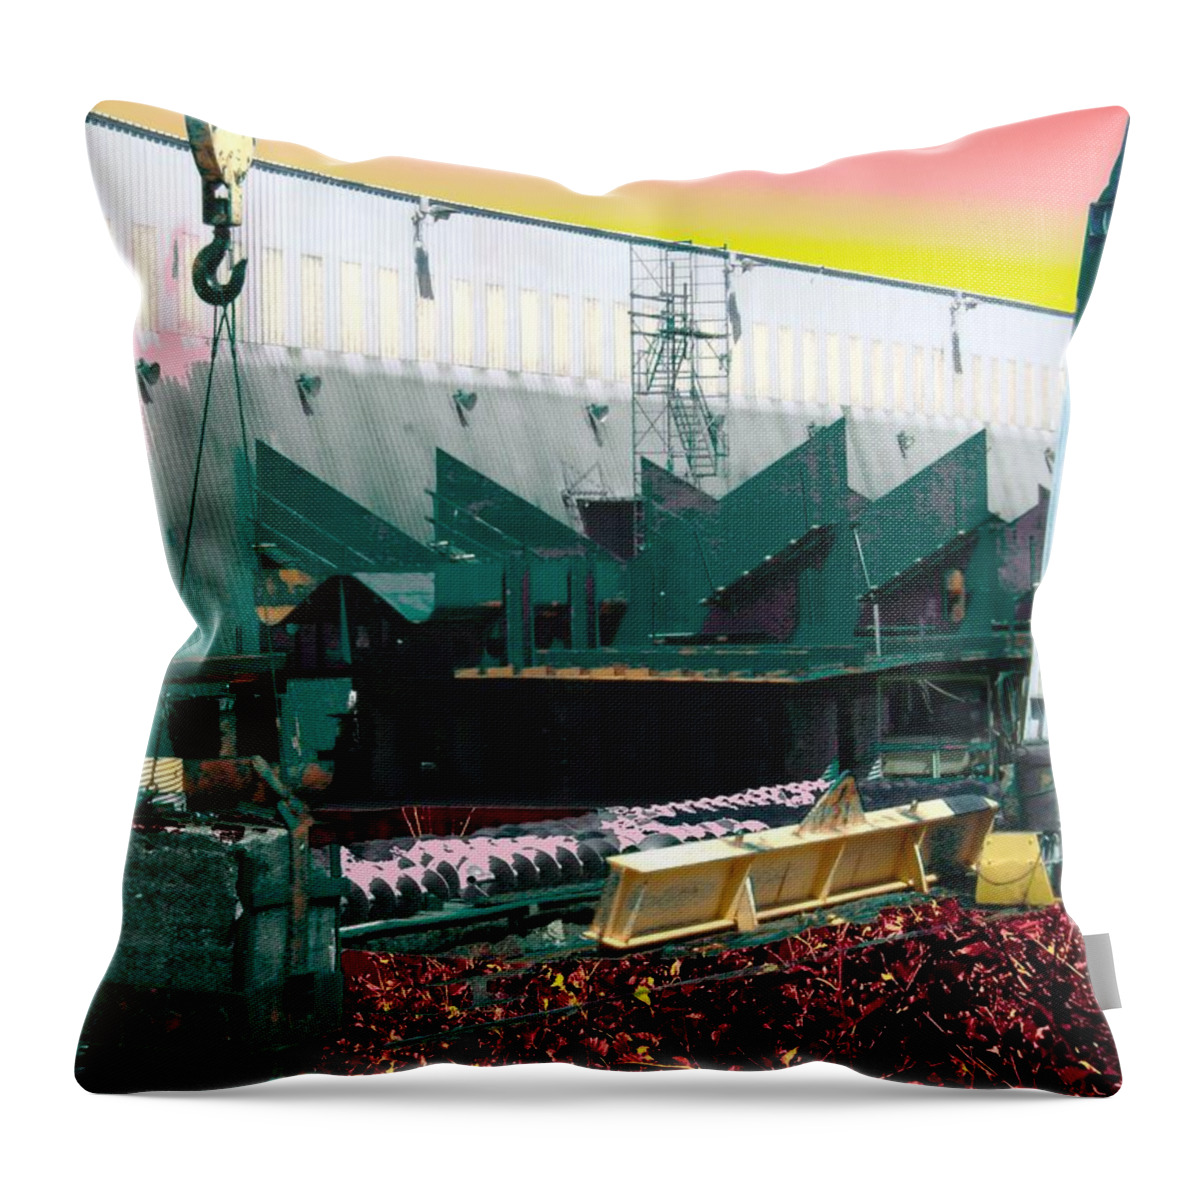 Surrealism Throw Pillow featuring the photograph Rose Colored Healthcare by Laureen Murtha Menzl